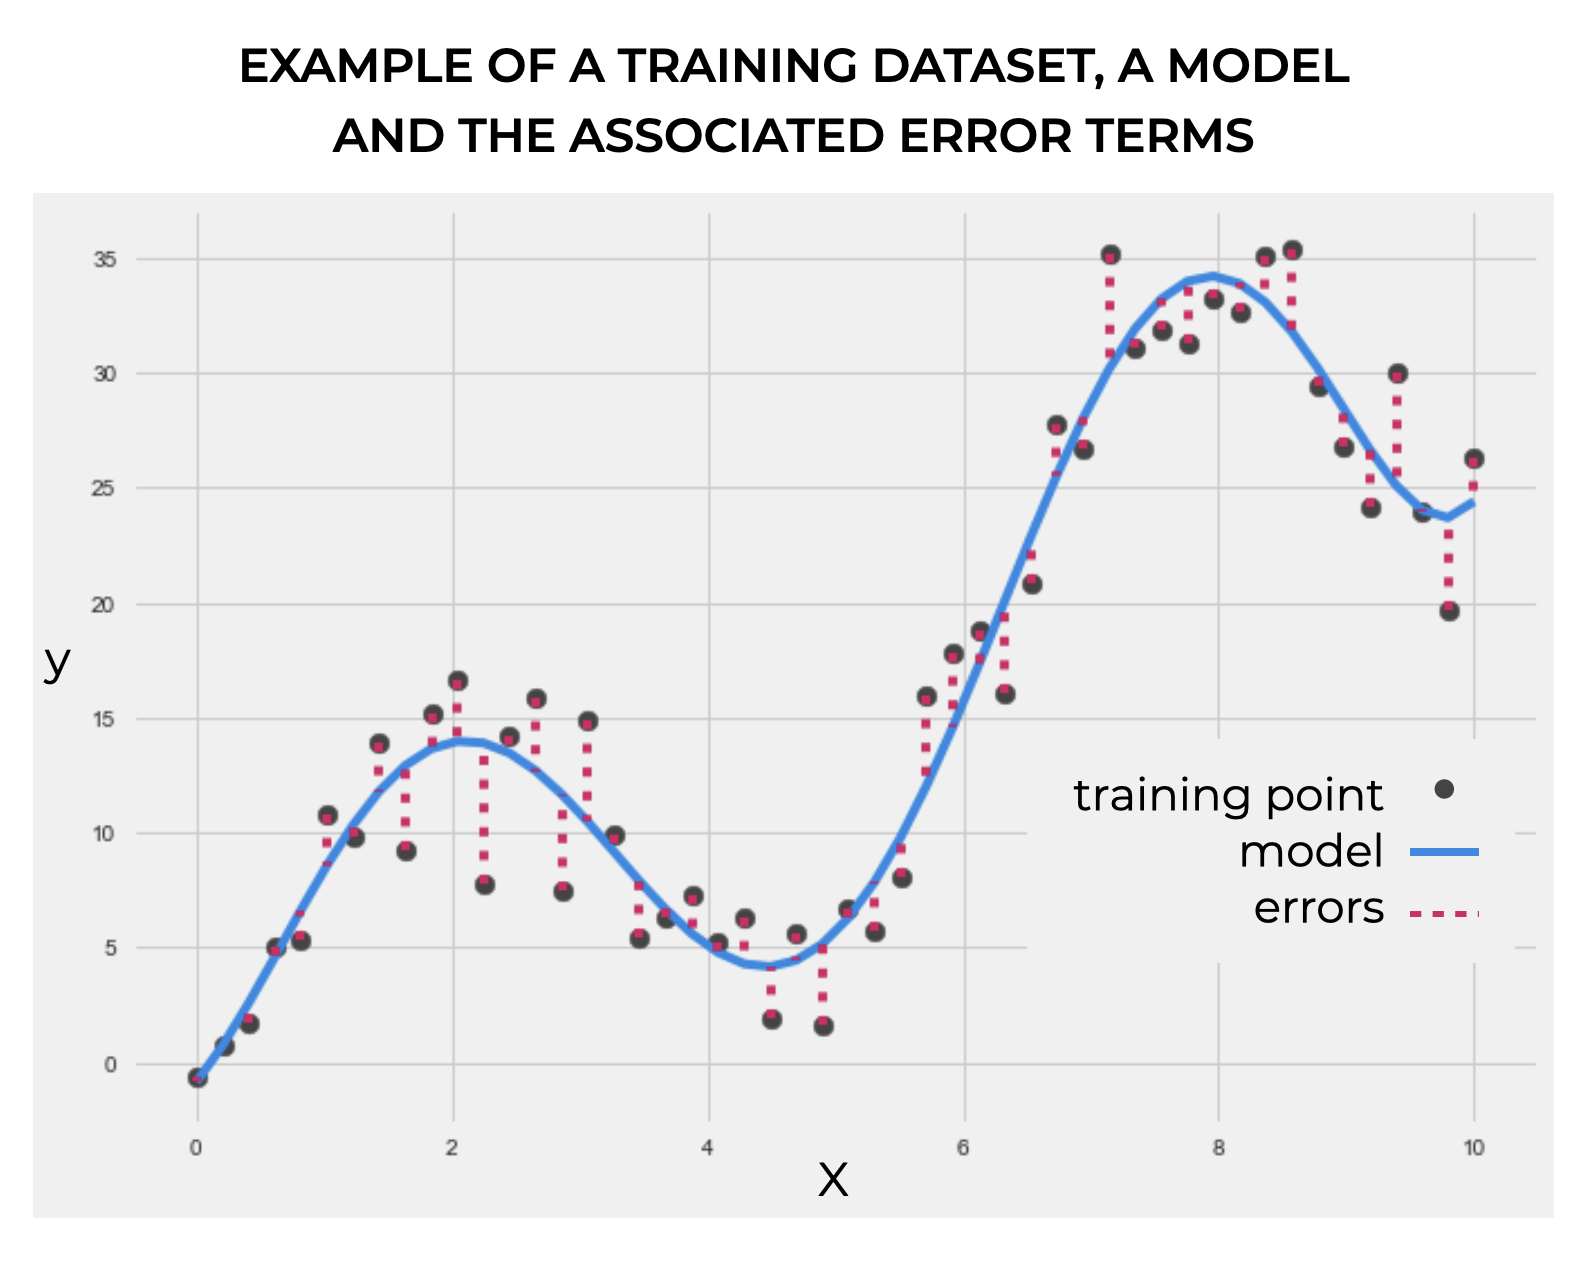 An image of some training datapoints, a polynomial model to fit the points, and the associated error terms between the model and the training datapoints.